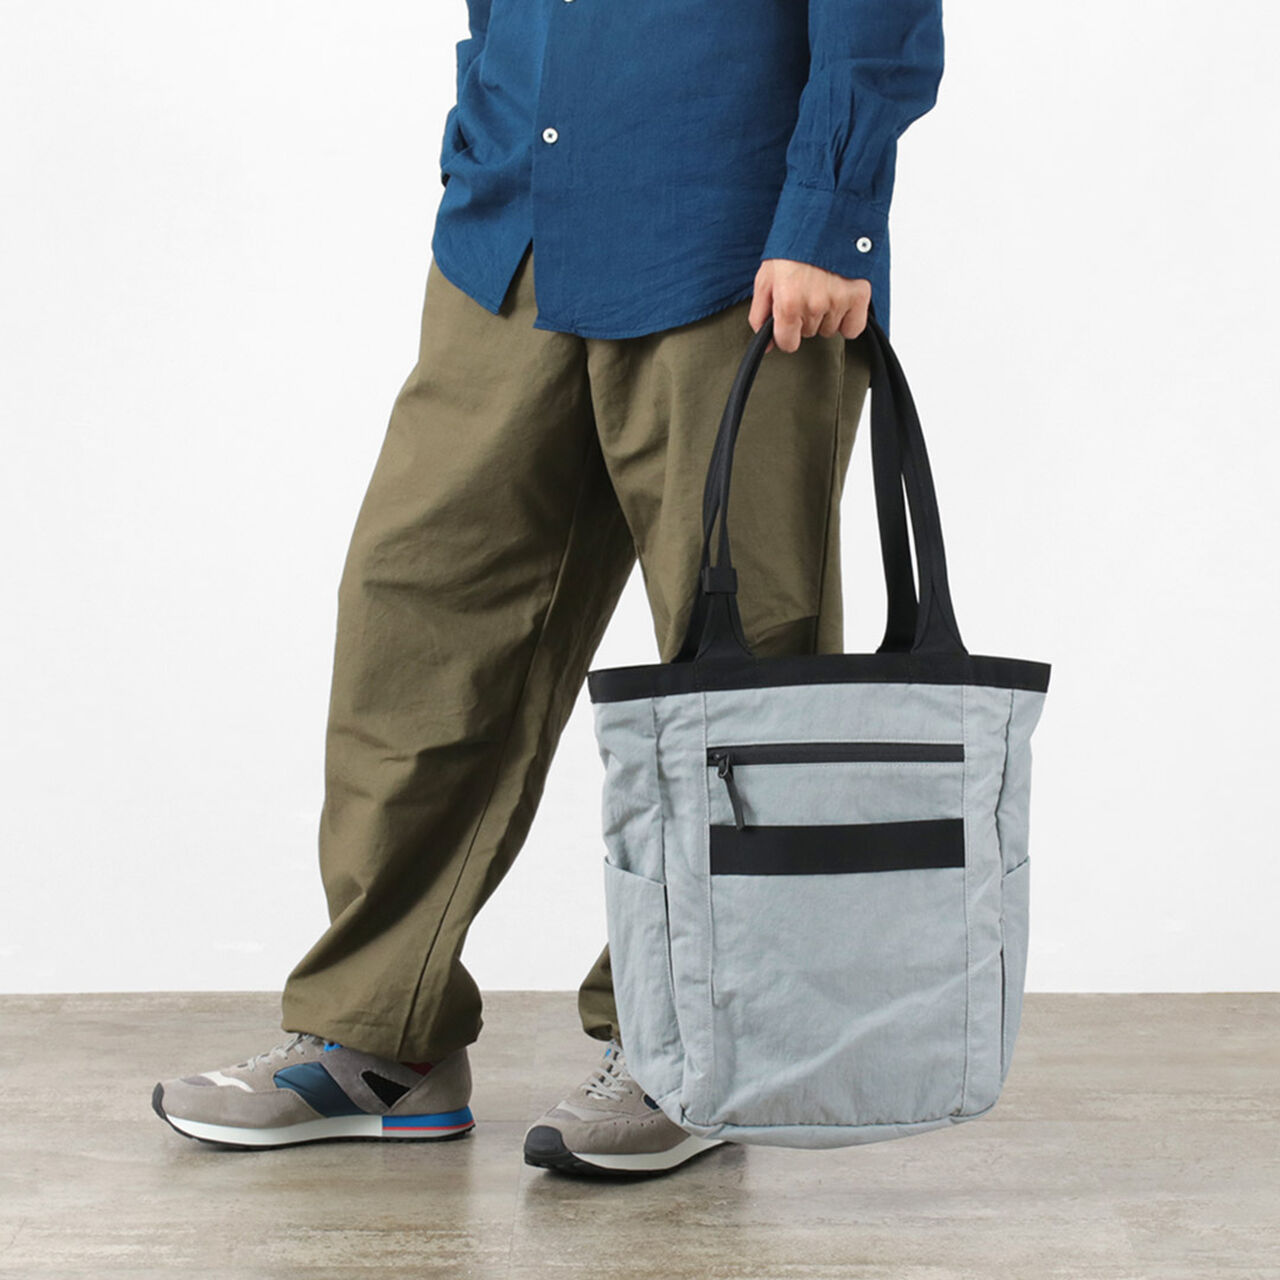 Go Tote 2,Grey, large image number 0